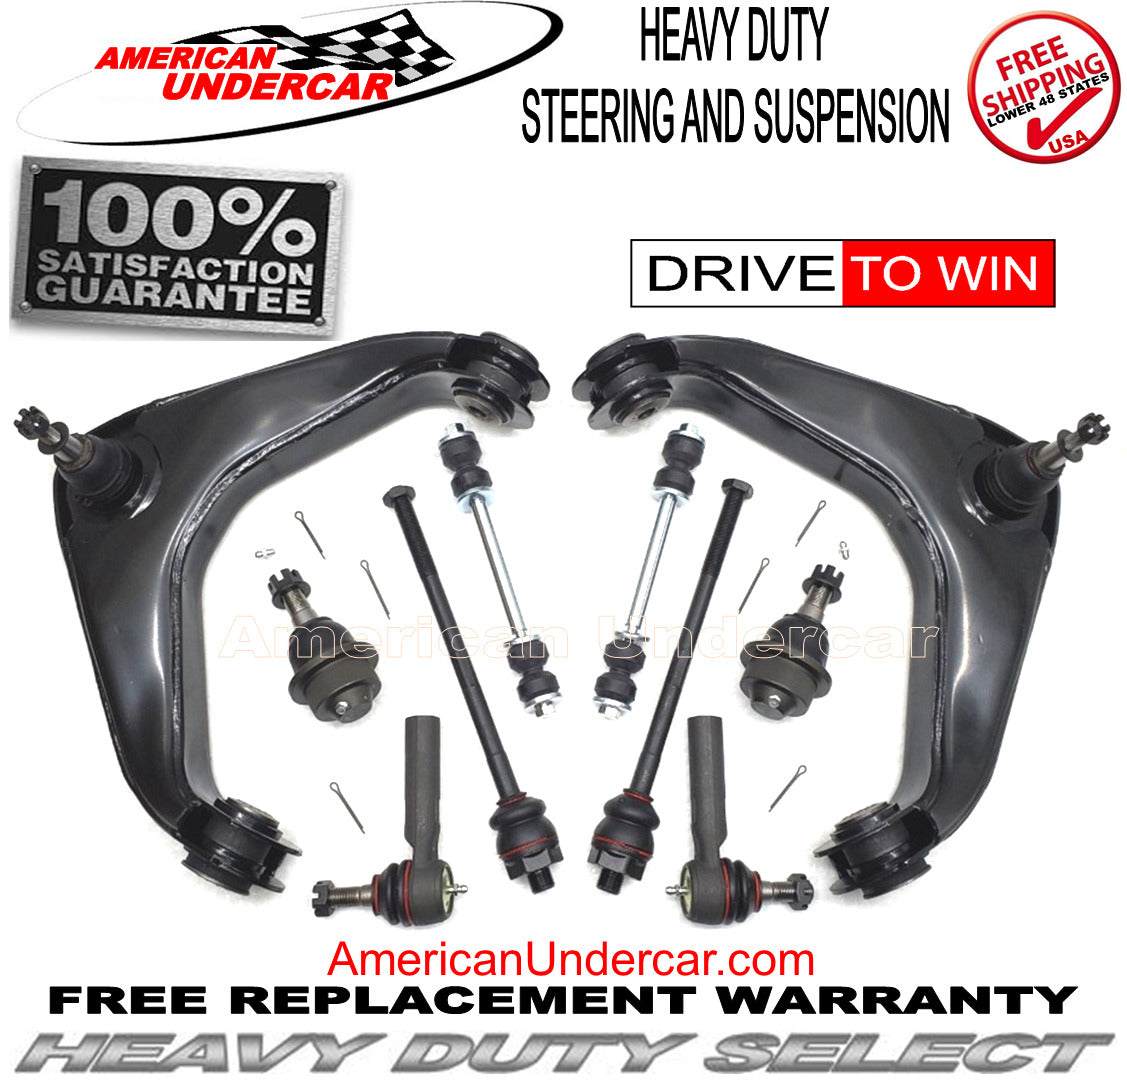 Heavy Duty Steering and Suspension Kit for 2001-2010 GMC Sierra 3500HD 2WD